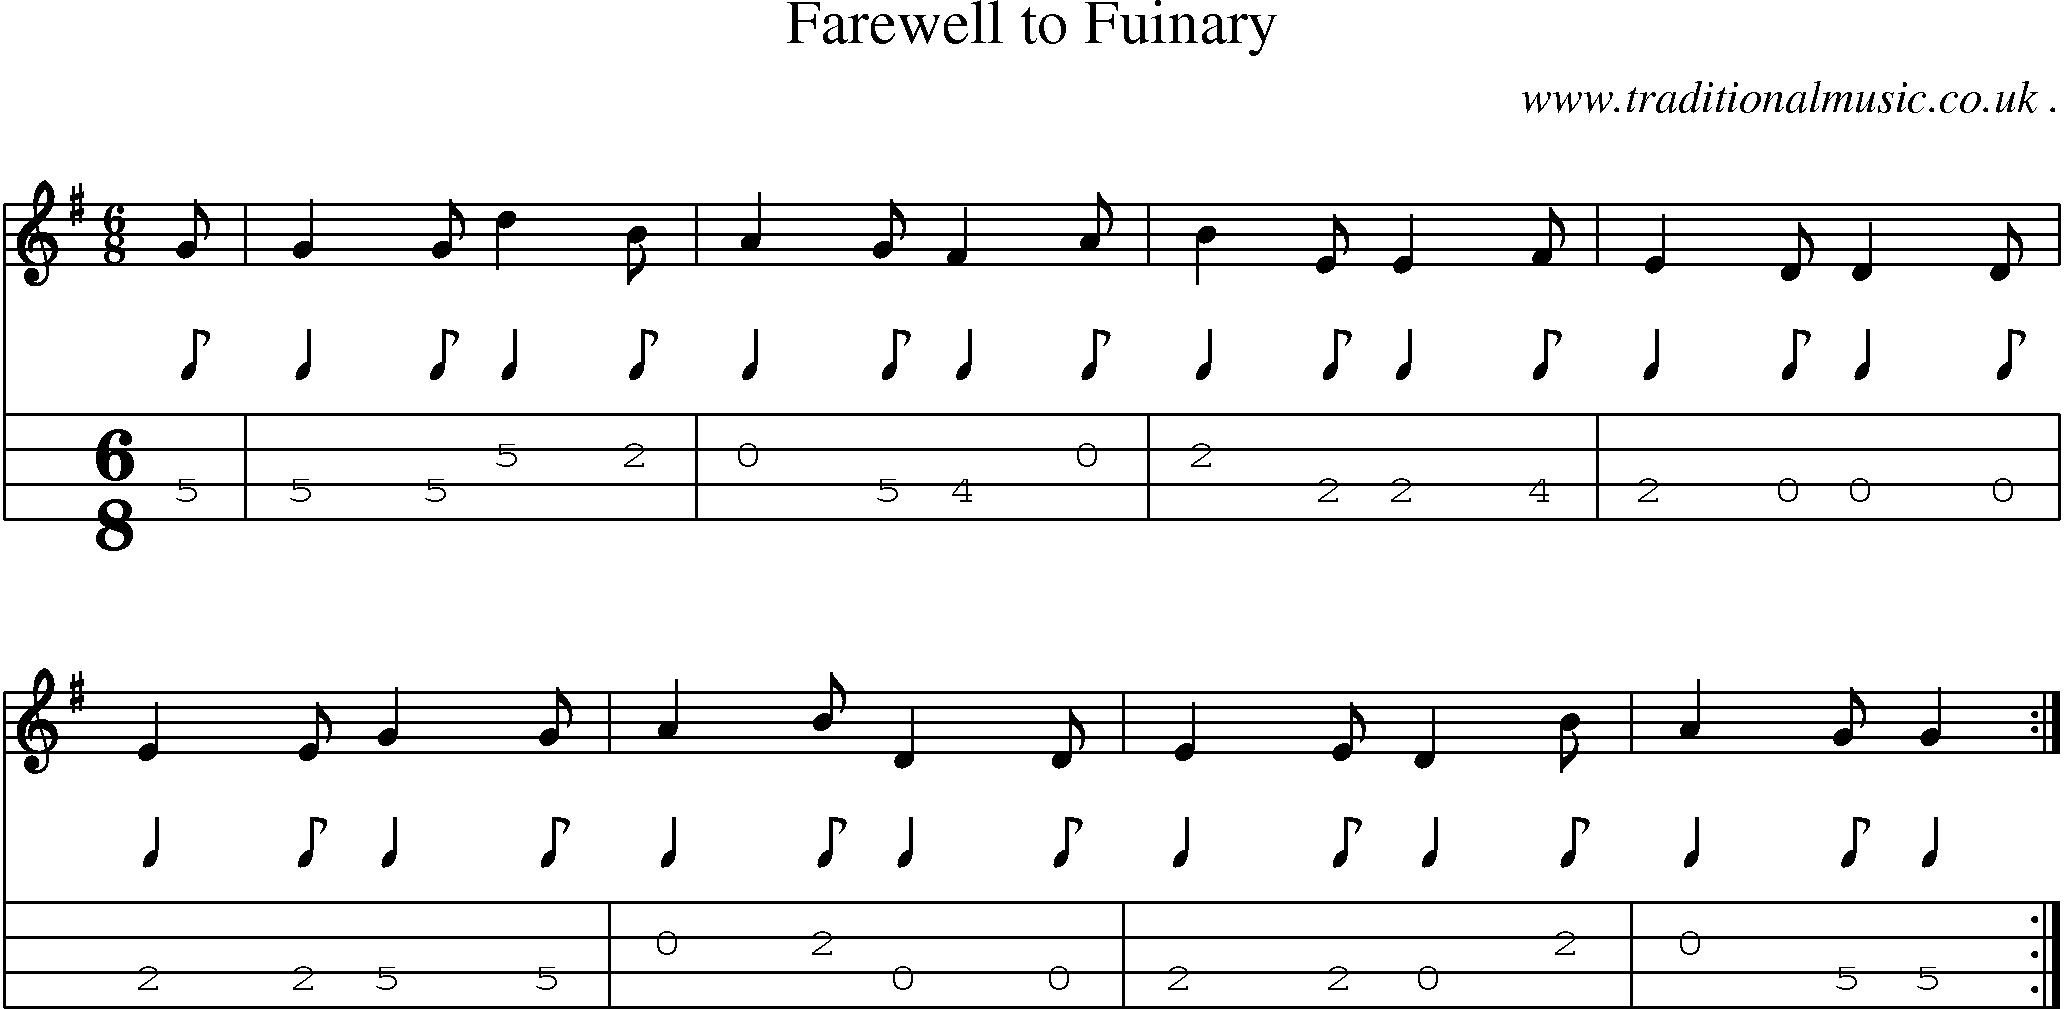 Sheet-music  score, Chords and Mandolin Tabs for Farewell To Fuinary